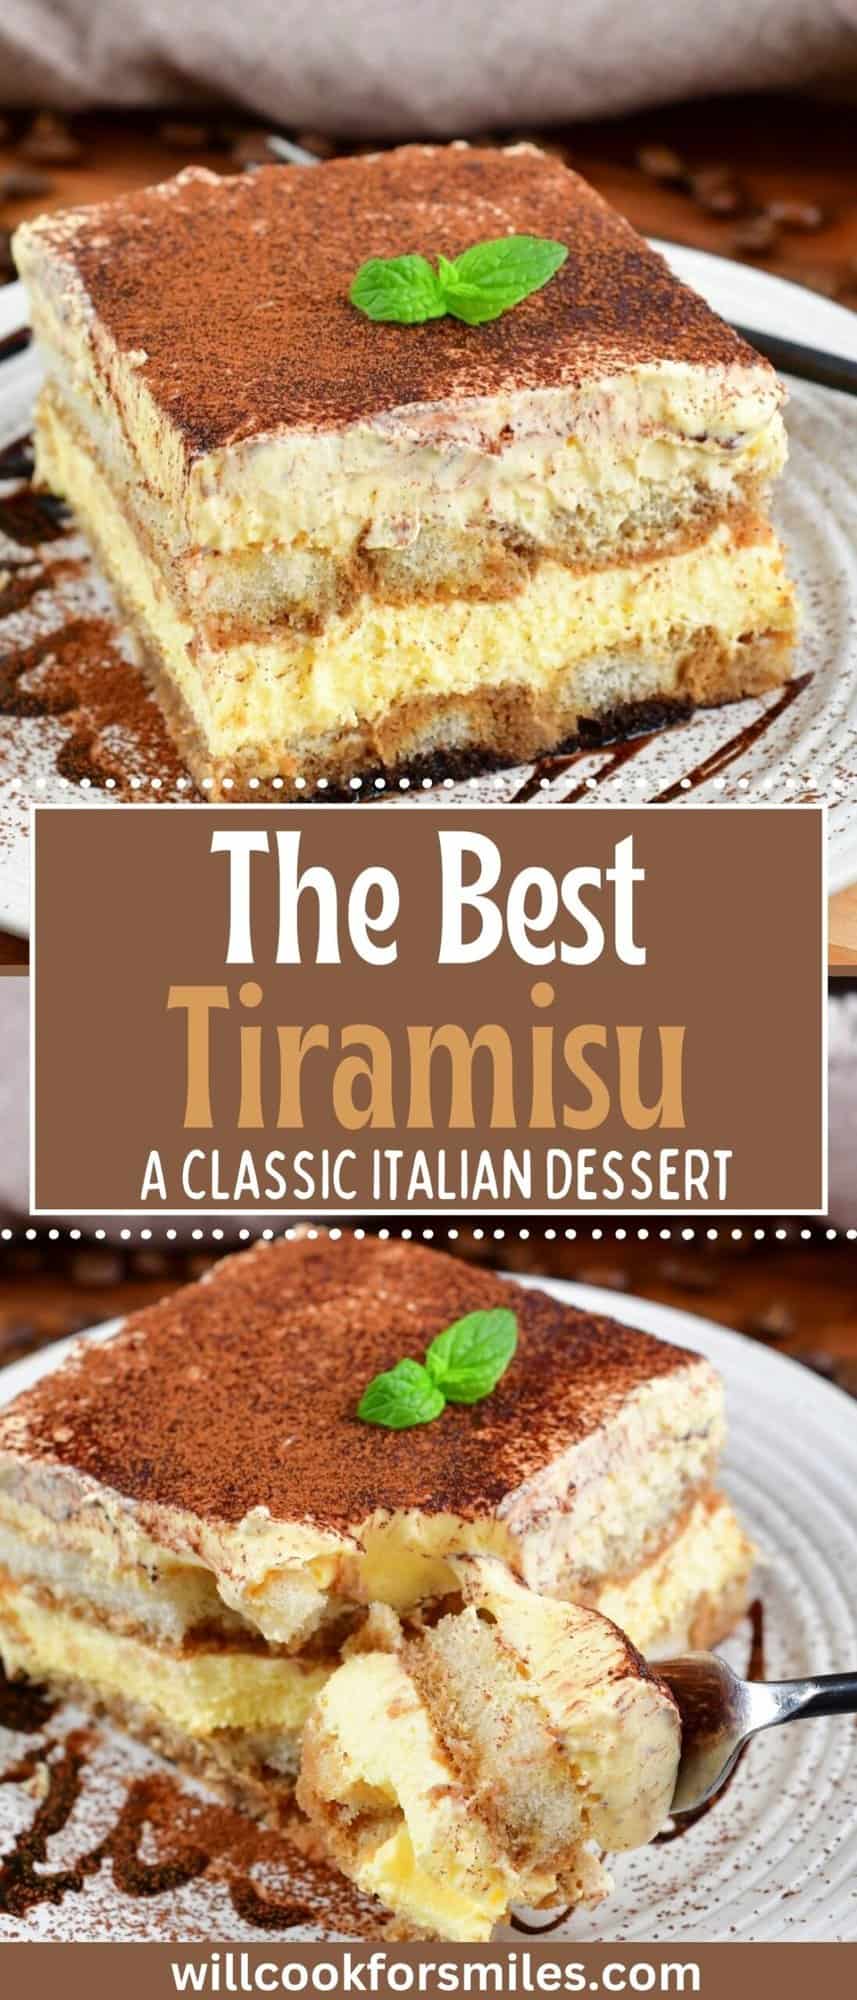 collage of two slices of tiramisu and title in the middle.